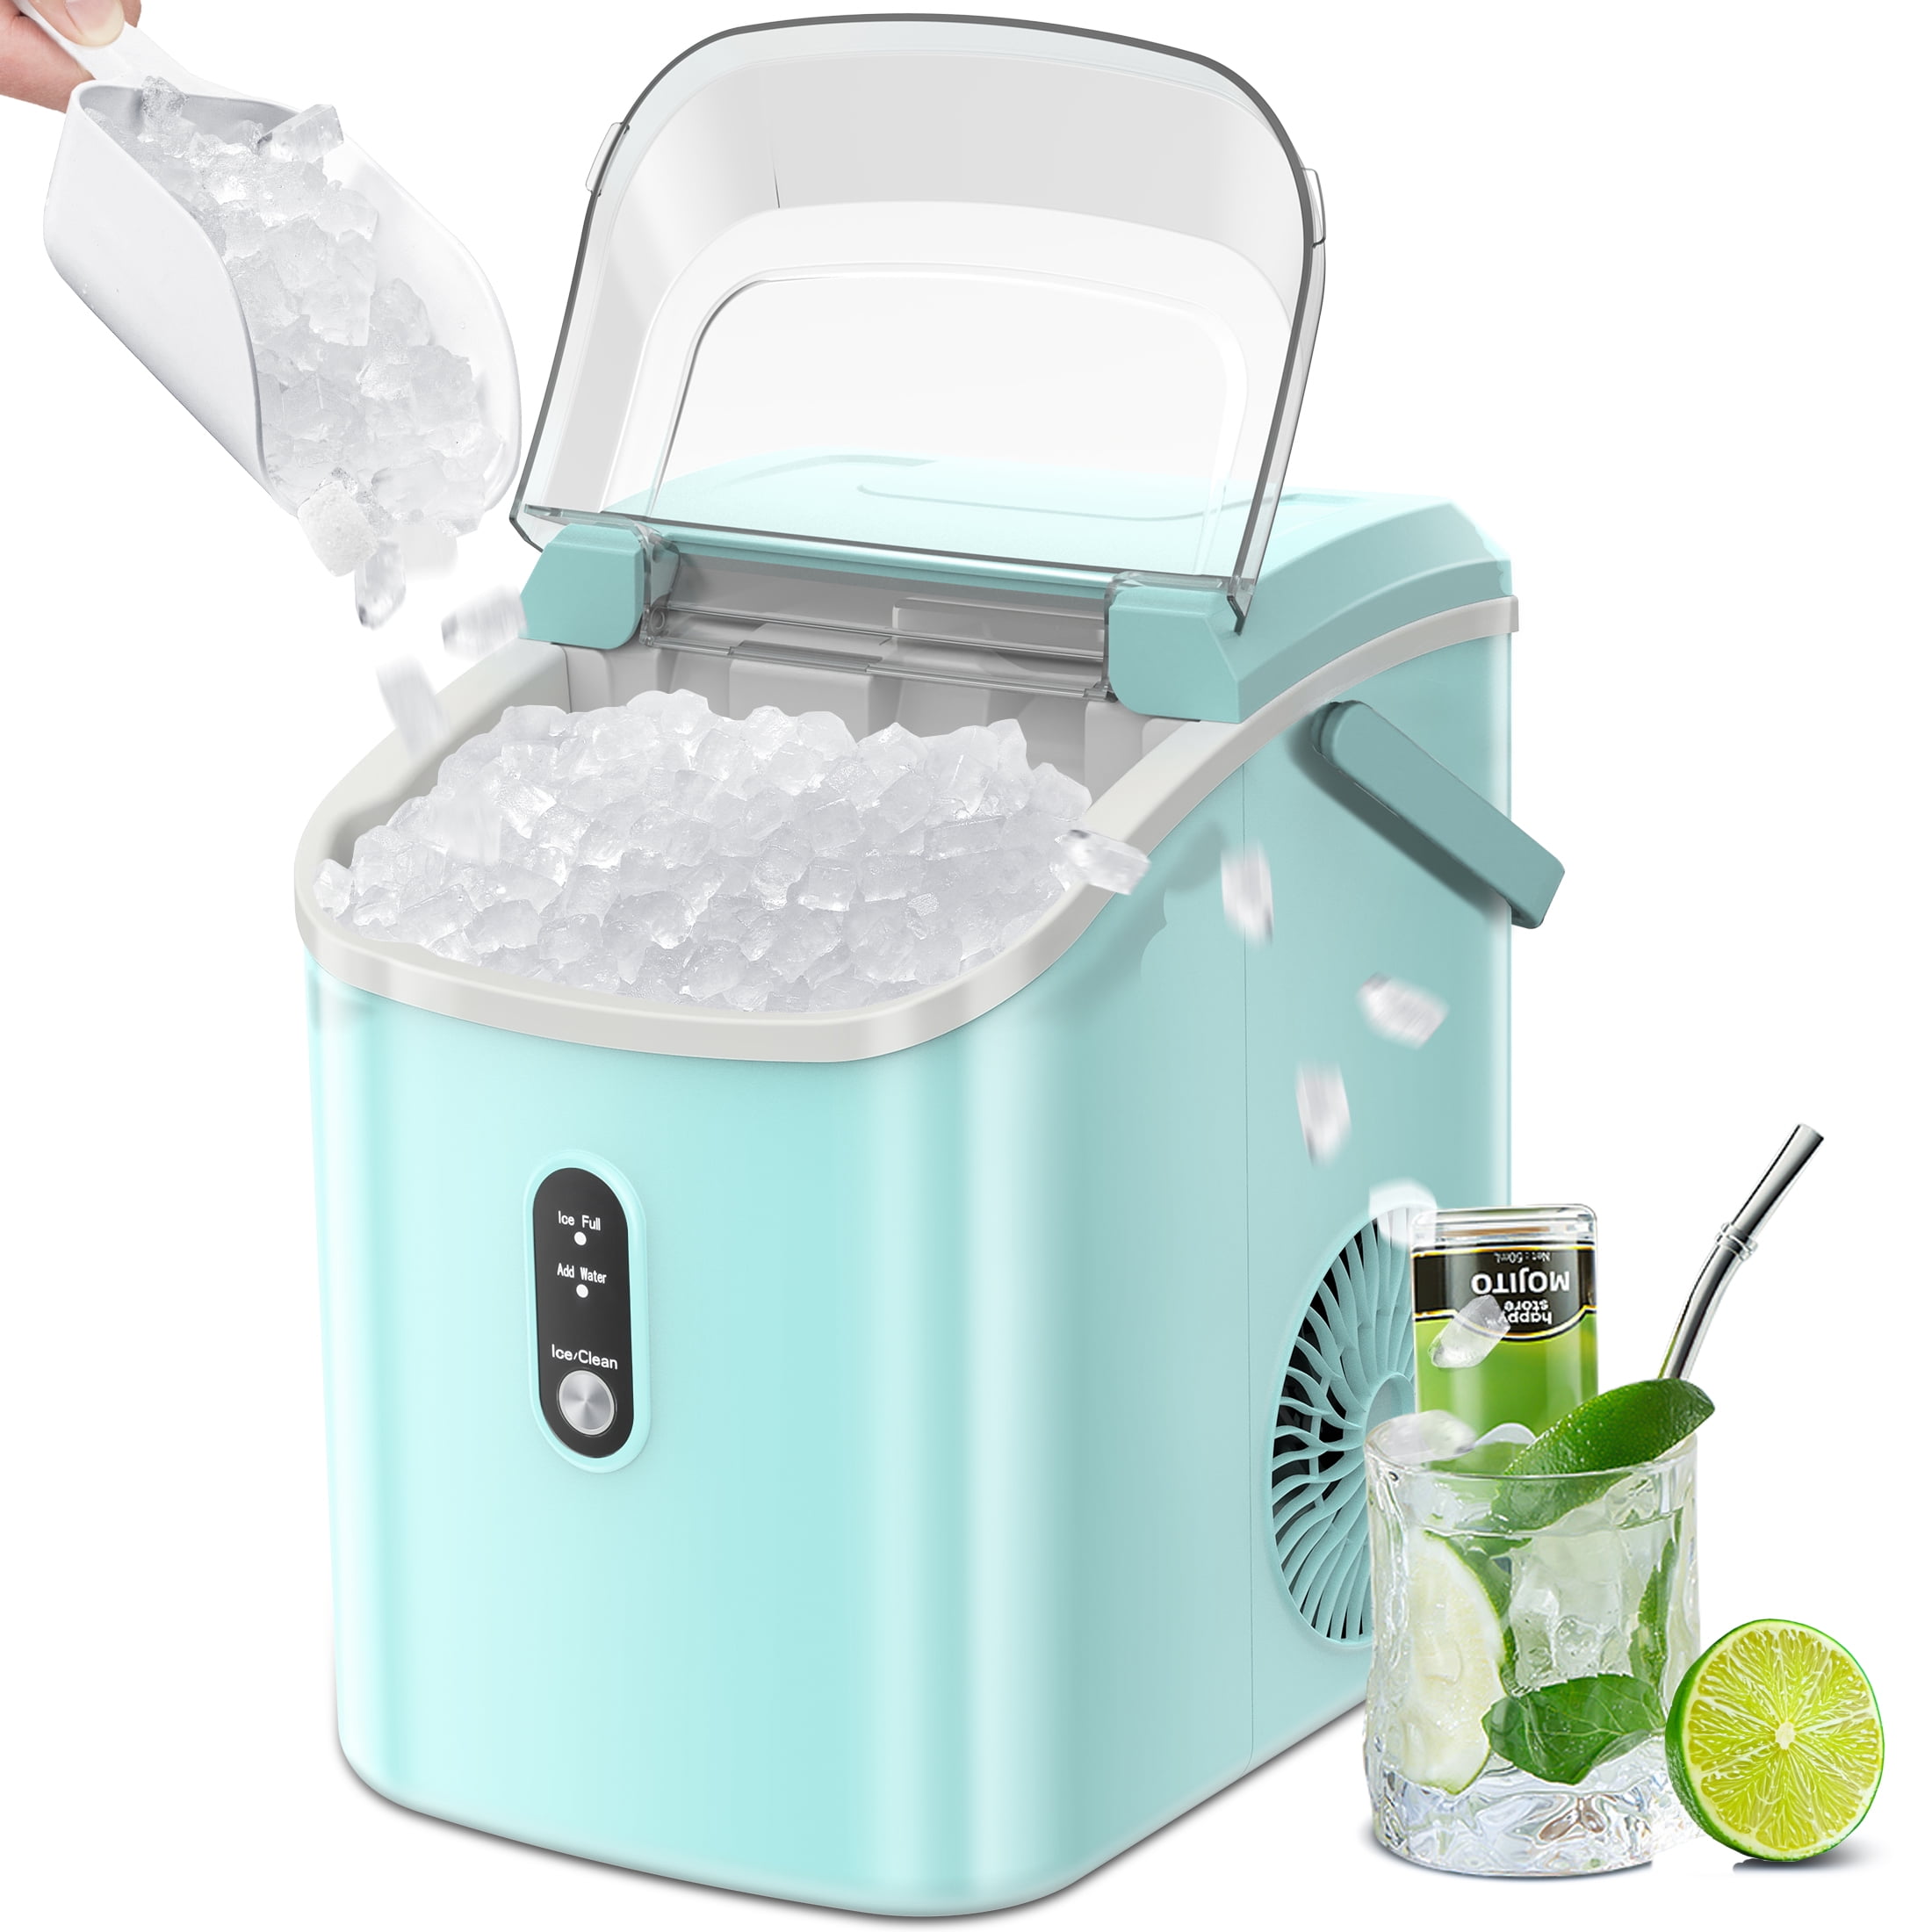  Kismile Nugget Ice Makers Countertop,Portable Ice Maker Machine  with Crushed Ice, 35lbs/Day,One-Click Operation,Self-Cleaning Countertop ice  machine,Pellet Ice Maker Countertop for Home/Kitchen/Office : Appliances